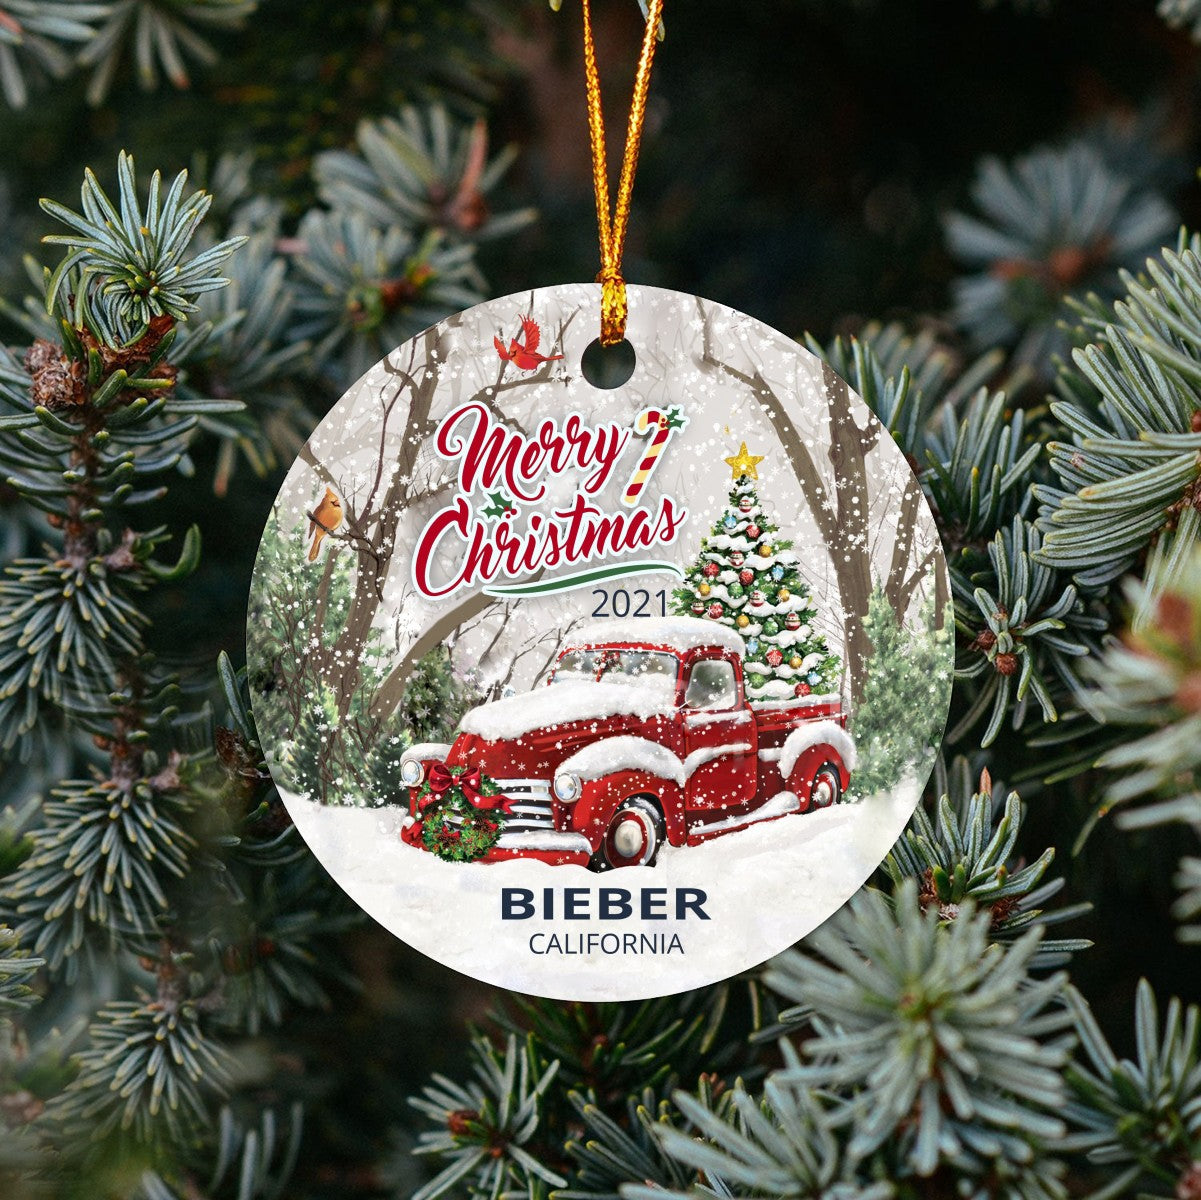 Christmas Tree Ornaments Bieber - Ornament Customize With Name City And State Bieber California CA - Red Truck Xmas Ornaments 3'' Plastic Gift For Family, Friend And Housewarming